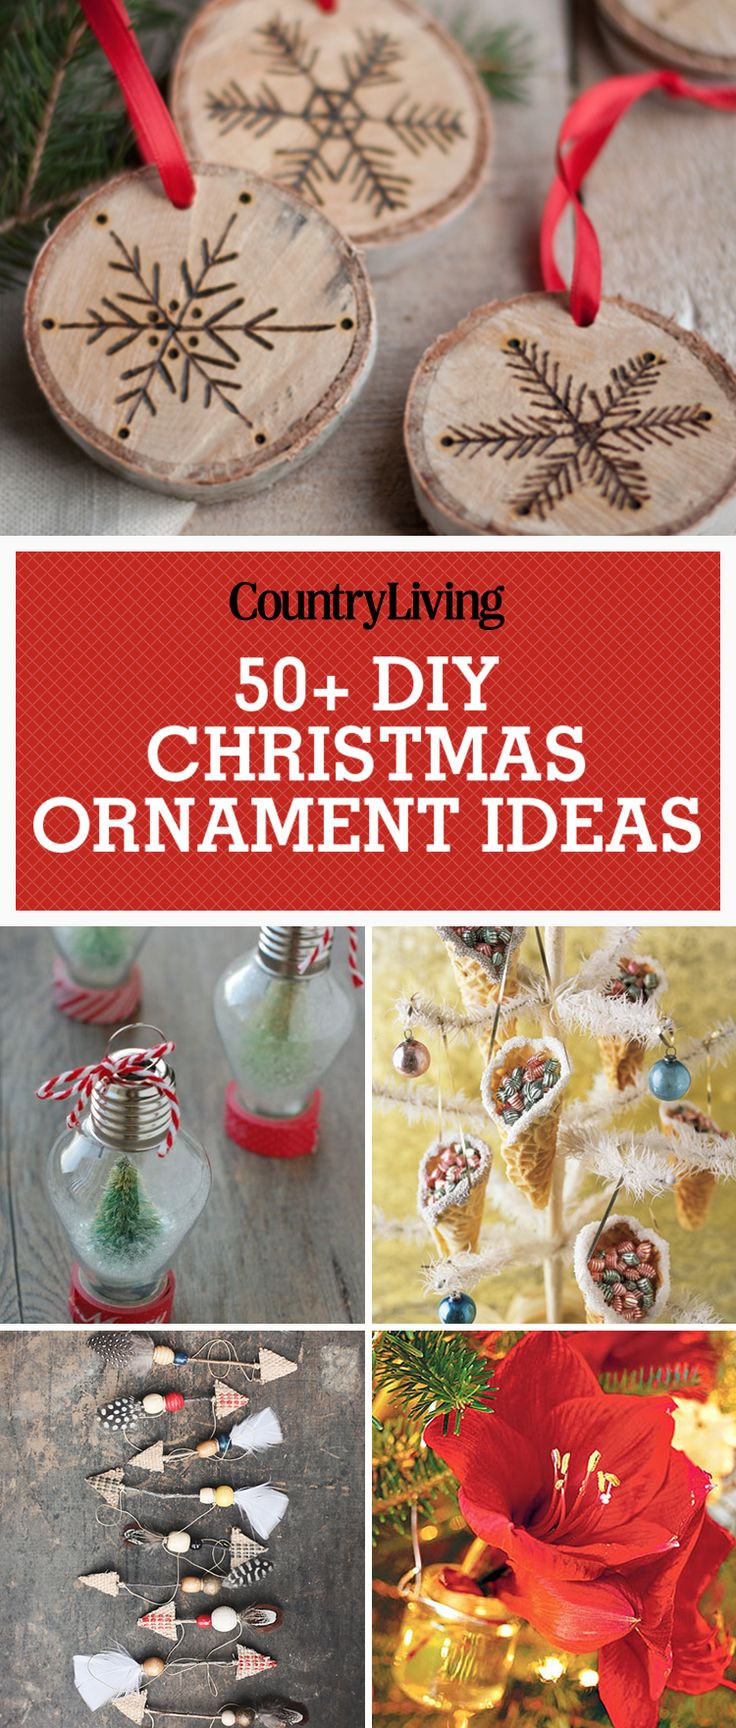 Easy Christmas DIY
 17 Best images about Christmas Decorations & Crafts on